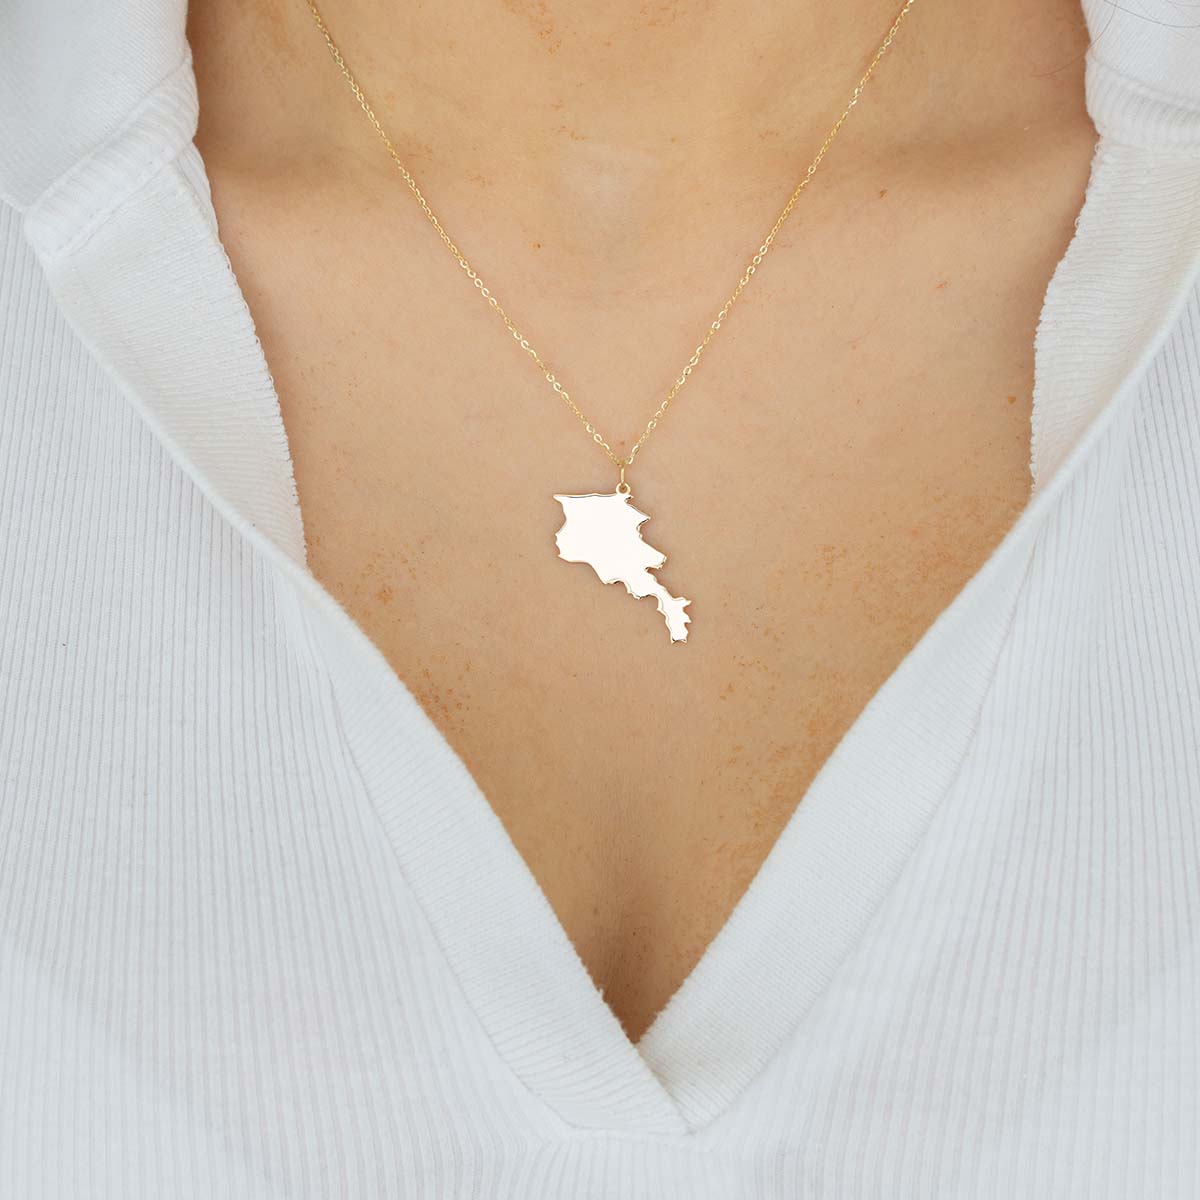 Armenian Country Map Necklace